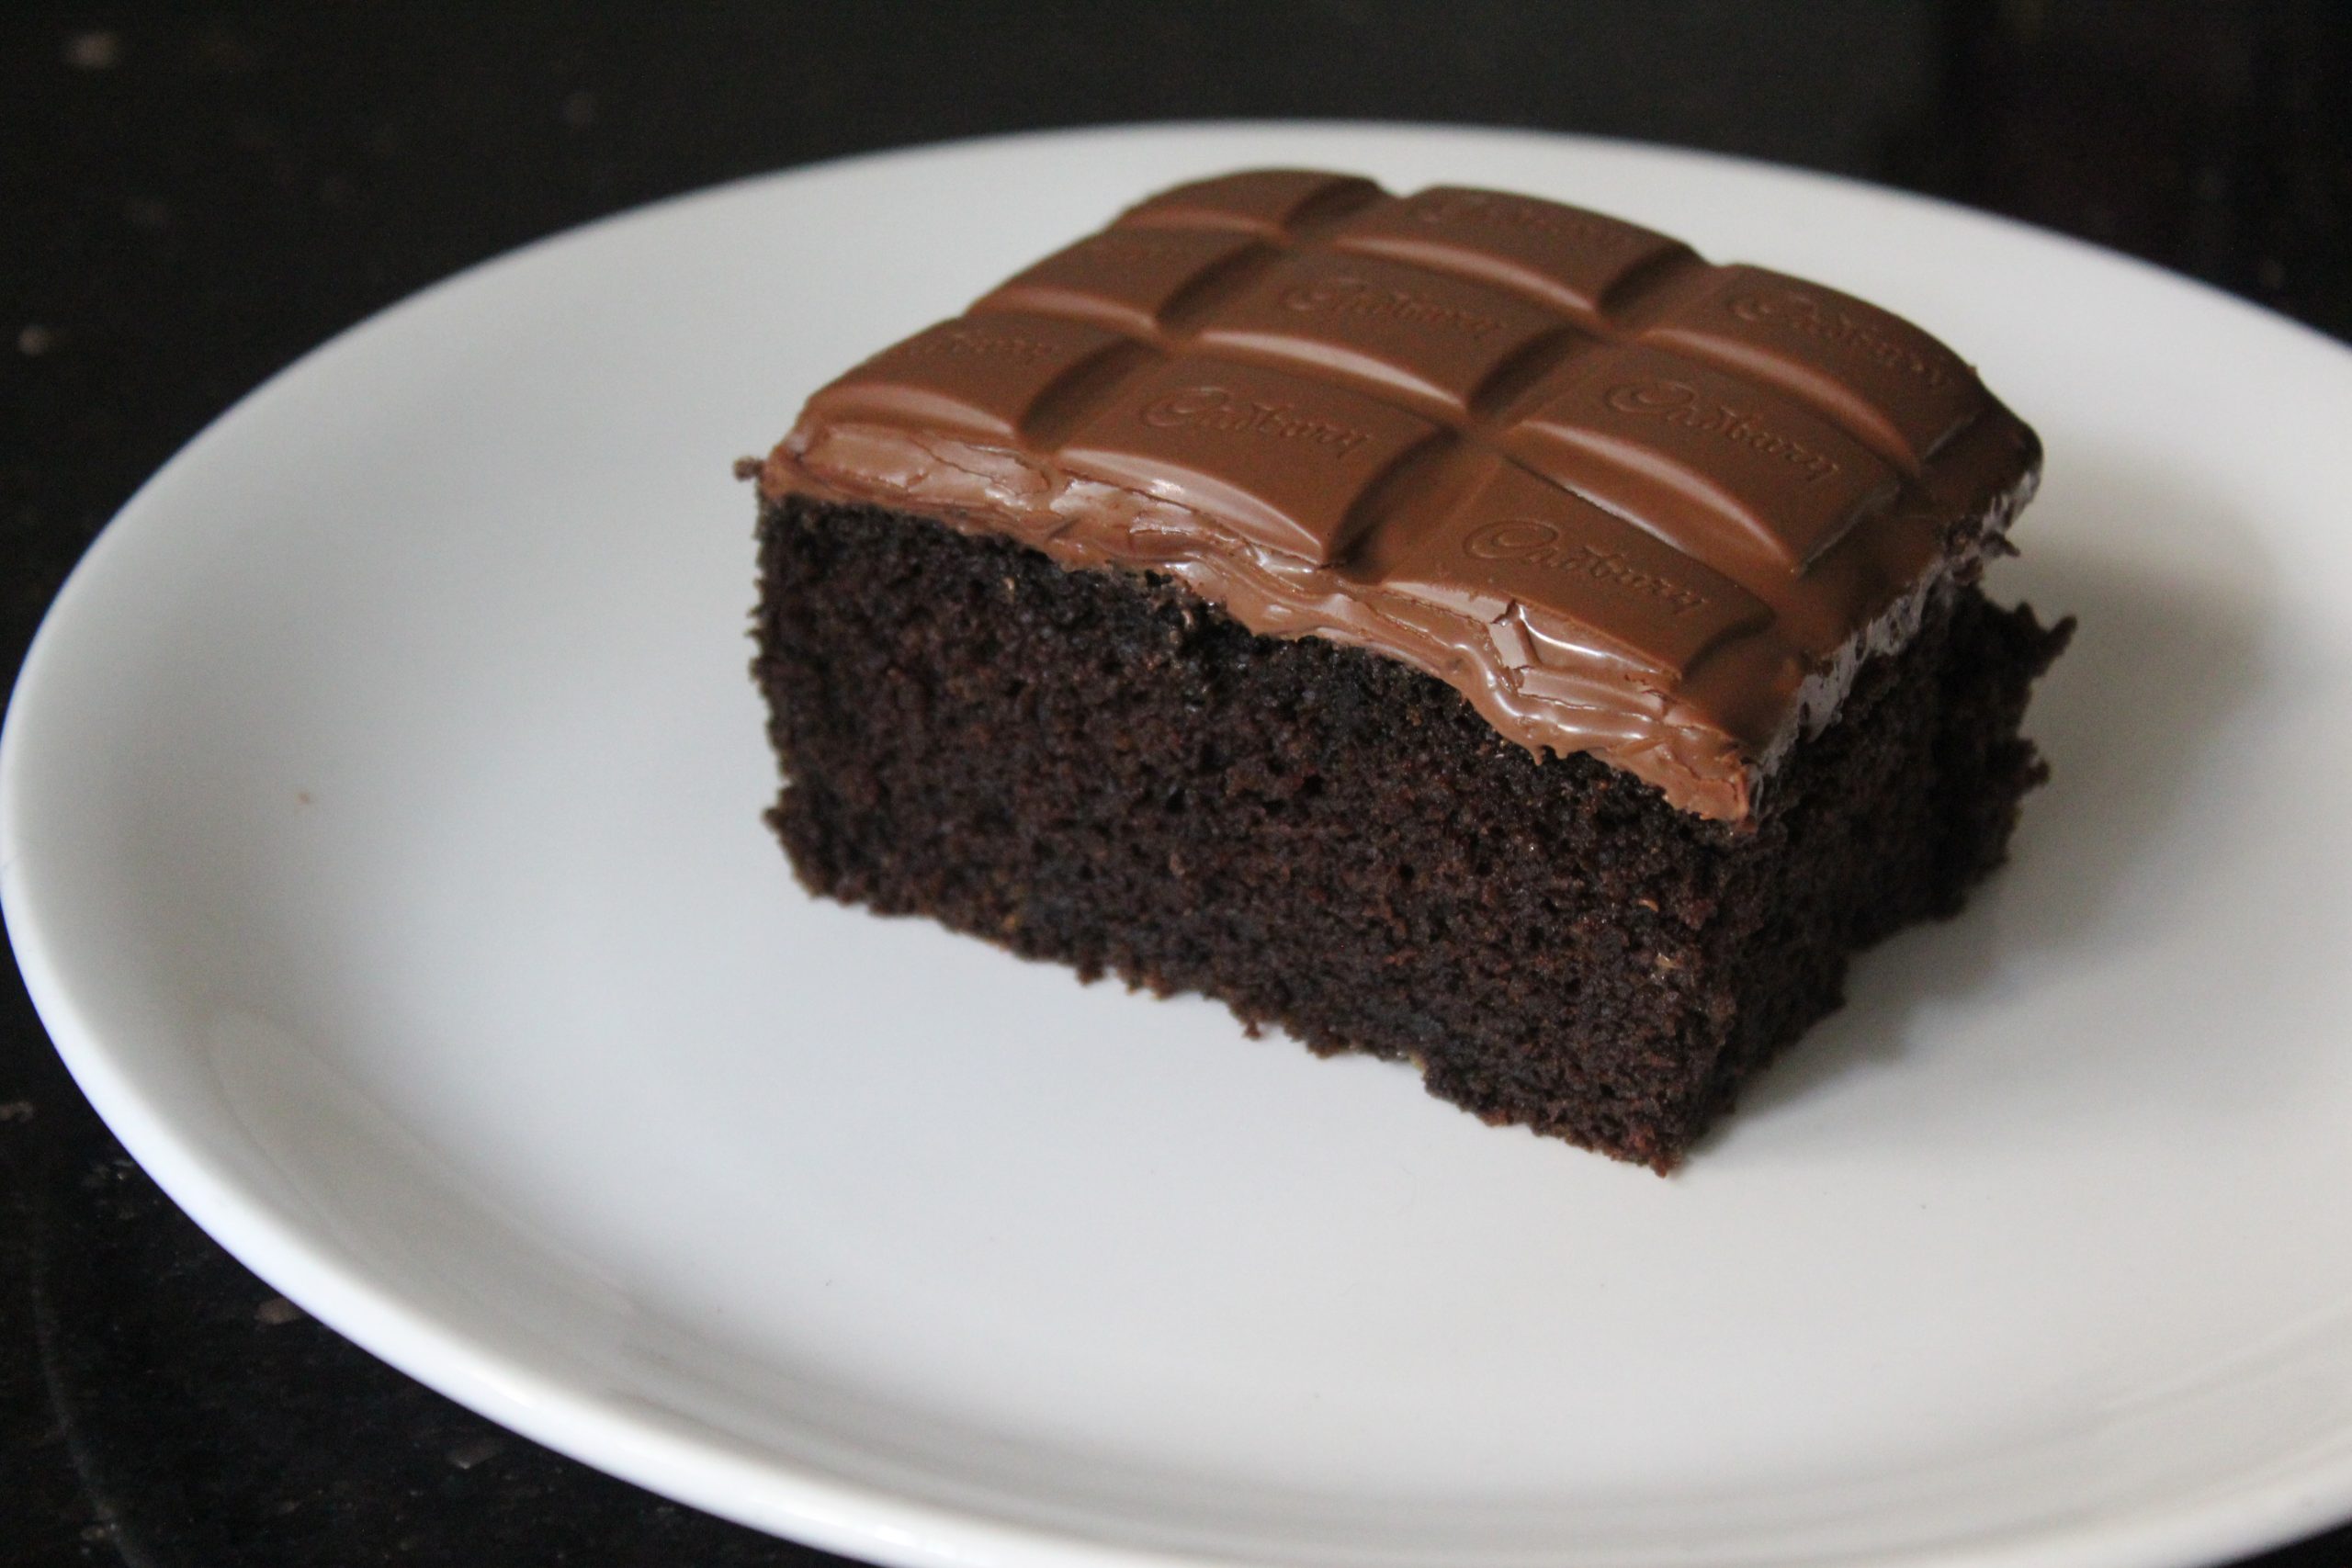 10 Best Chocolate Cake with Candy Bars Recipes | Yummly